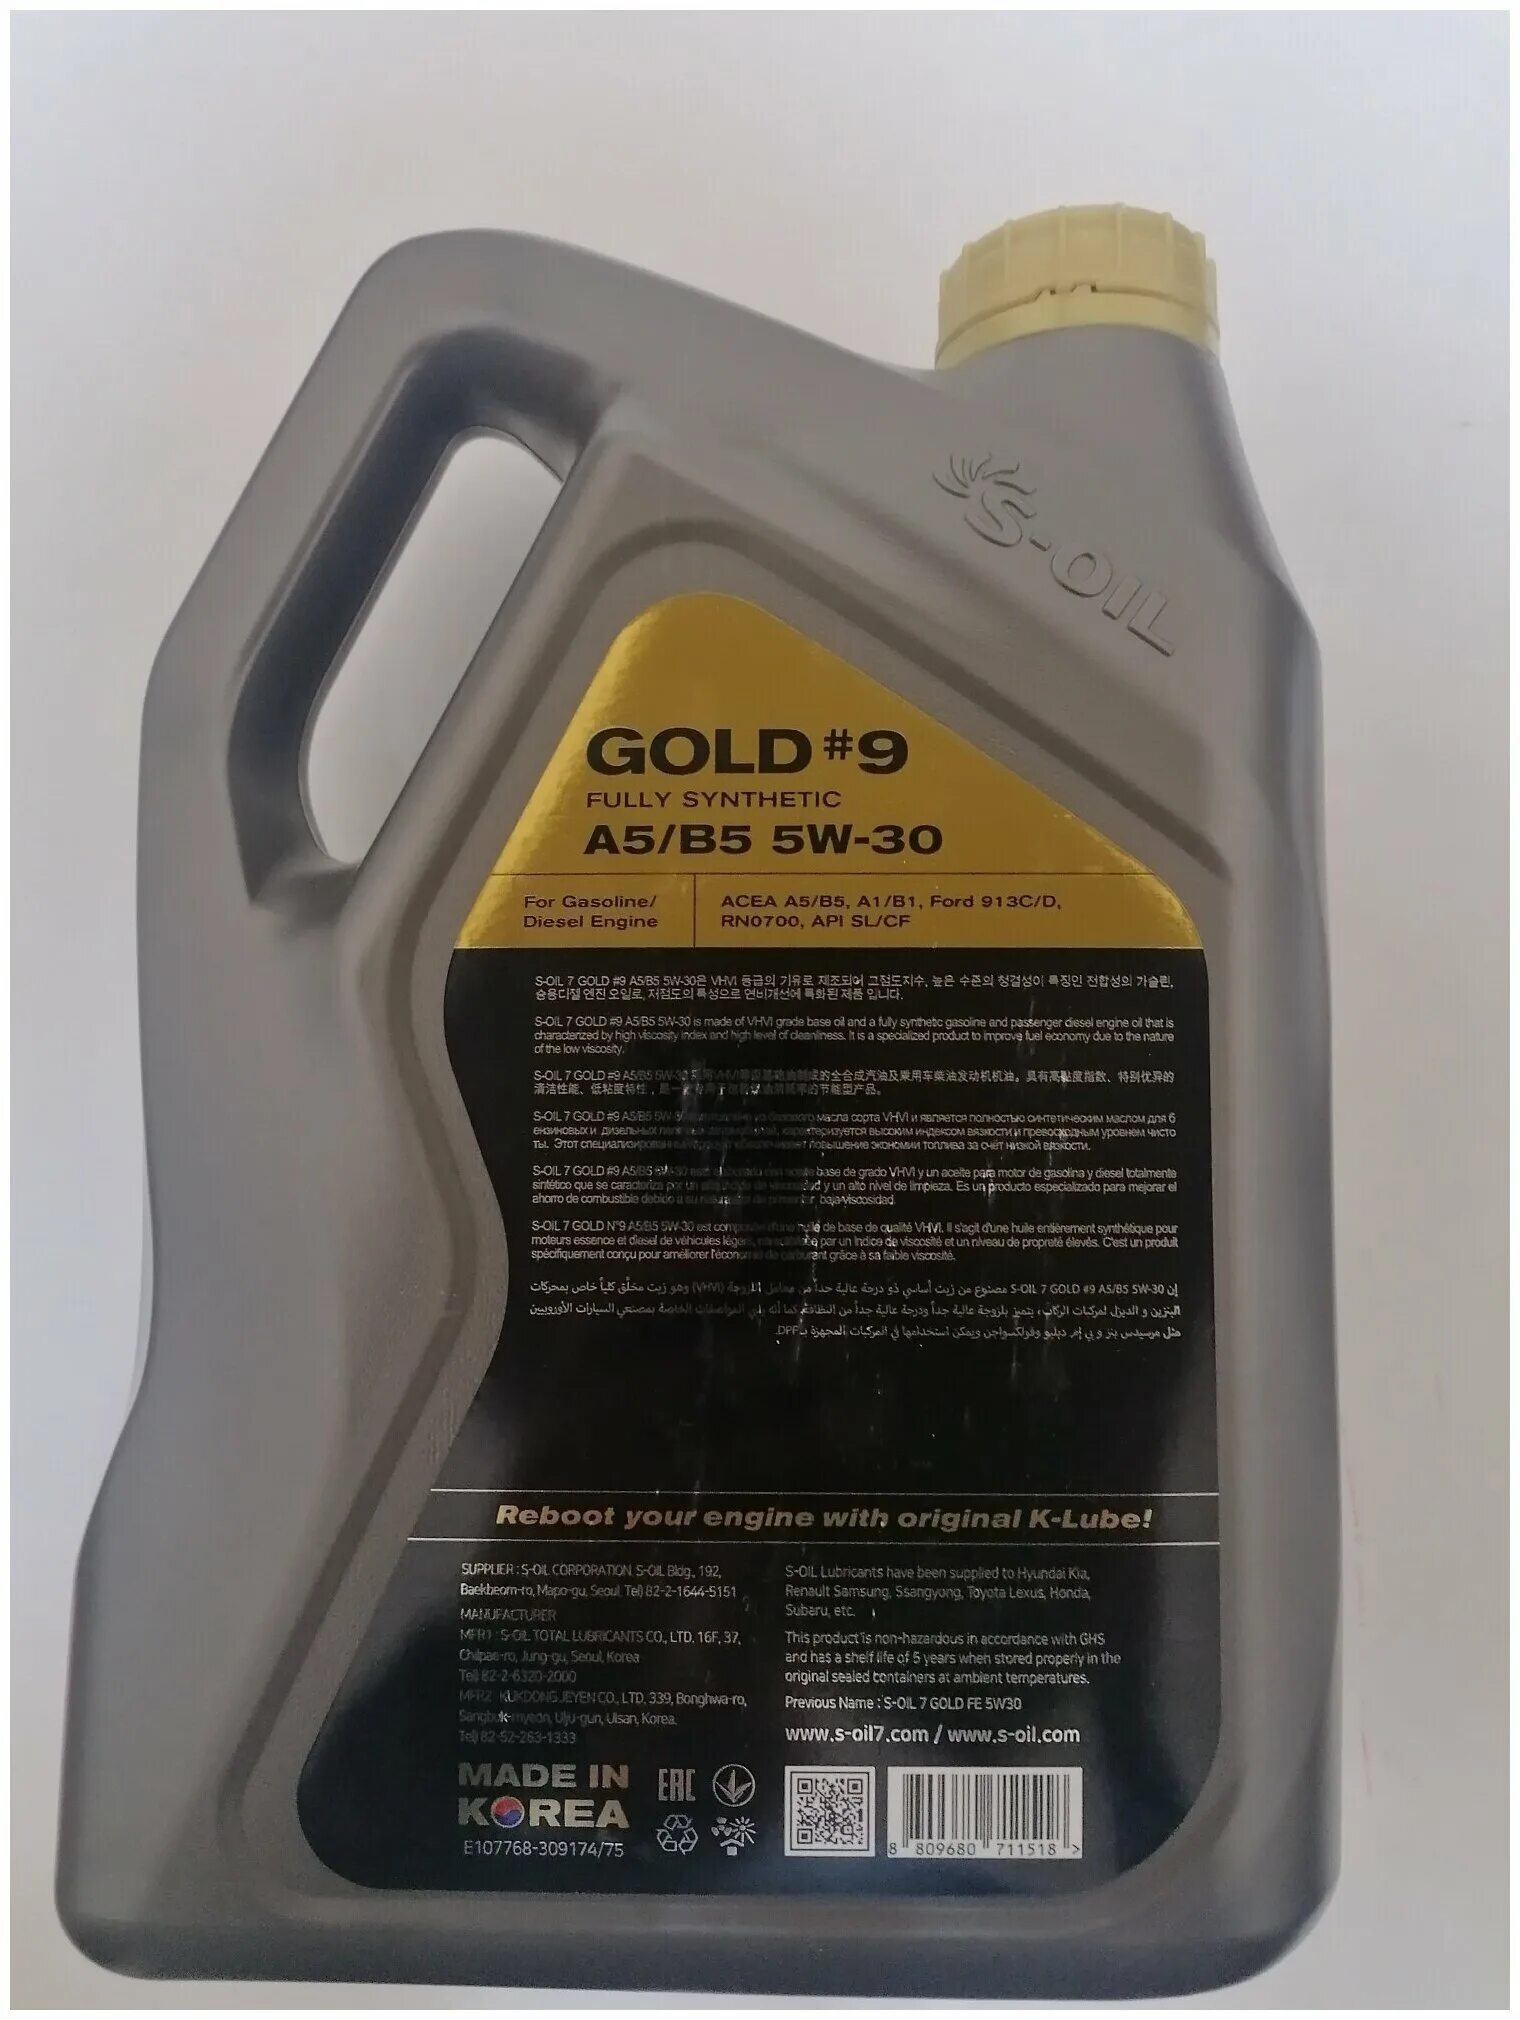 Масло gold 9. S-Oil Seven Gold #9 5w-30 a5/b5. S-Oil Seven 5w-30 Gold 9. S-Oil Seven Gold 9 5w-30 артикул. Масло s Oil Gold 5w30.